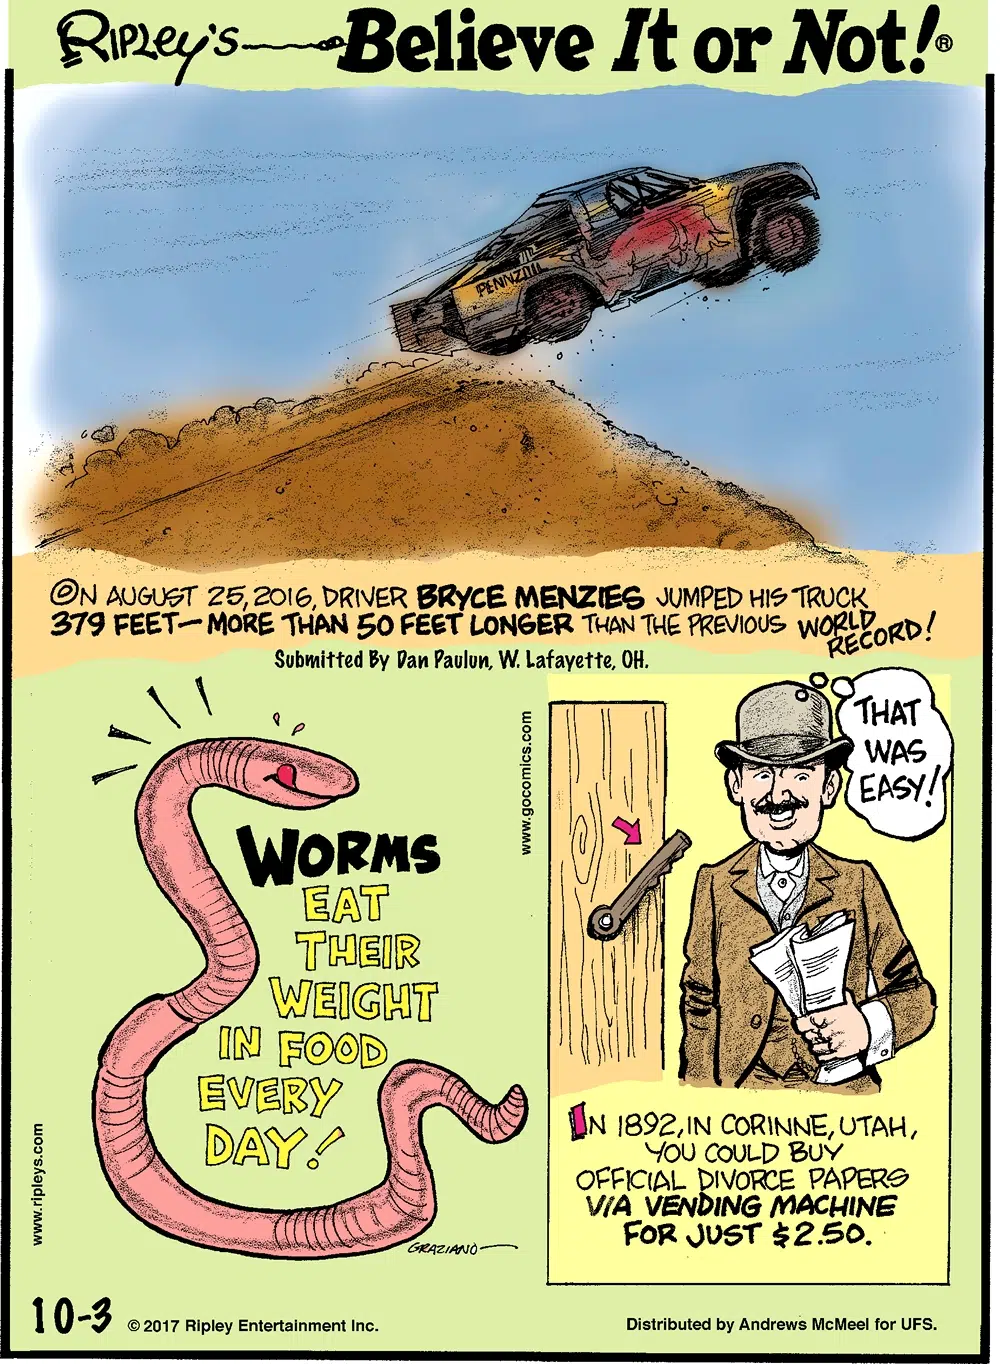 On August 25, 2016, driver Bryce Menzies jumped his truck 379 feet - more than 50 feet longer than the previous world record! Submitted by Dan Paulun, W. Lafayette, OH.-------------------- Worms eat their weight in food every day!-------------------- In 1892, in Corinne, Utah, you could buy official divorce papers via vending machine for just $2.50.